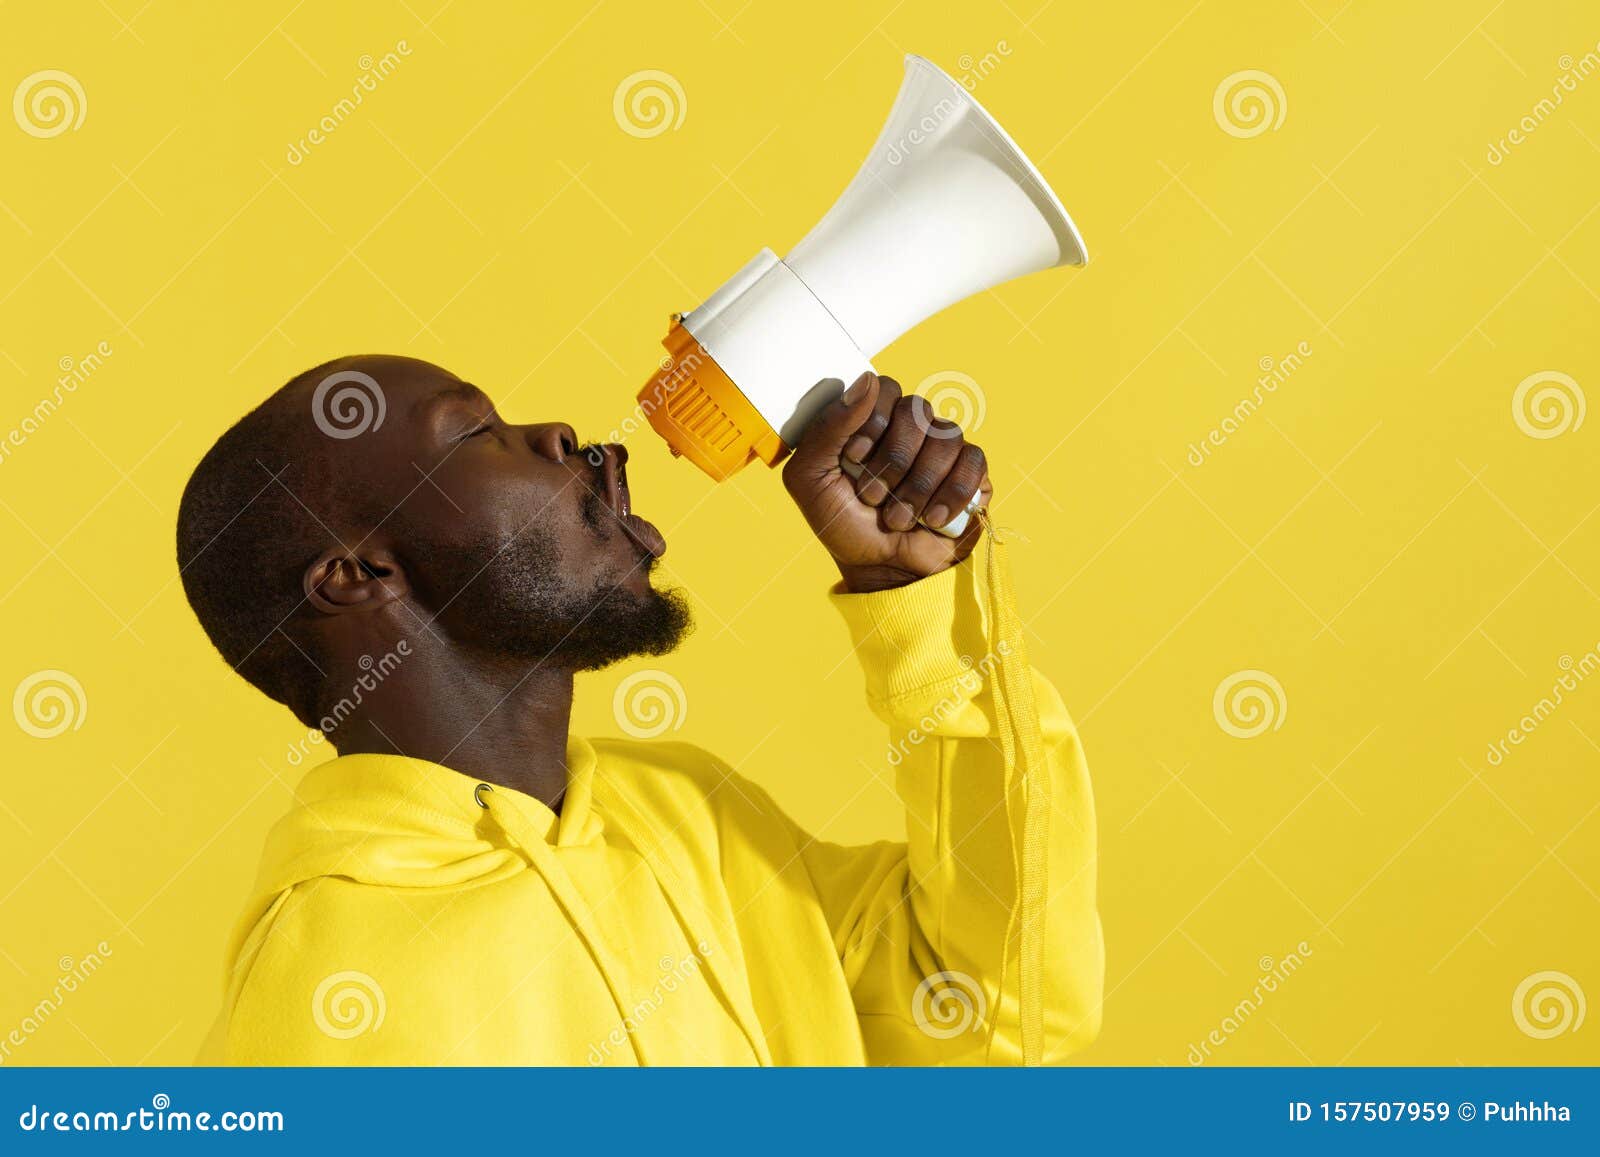 attention! black man shouting in megaphone on yellow background